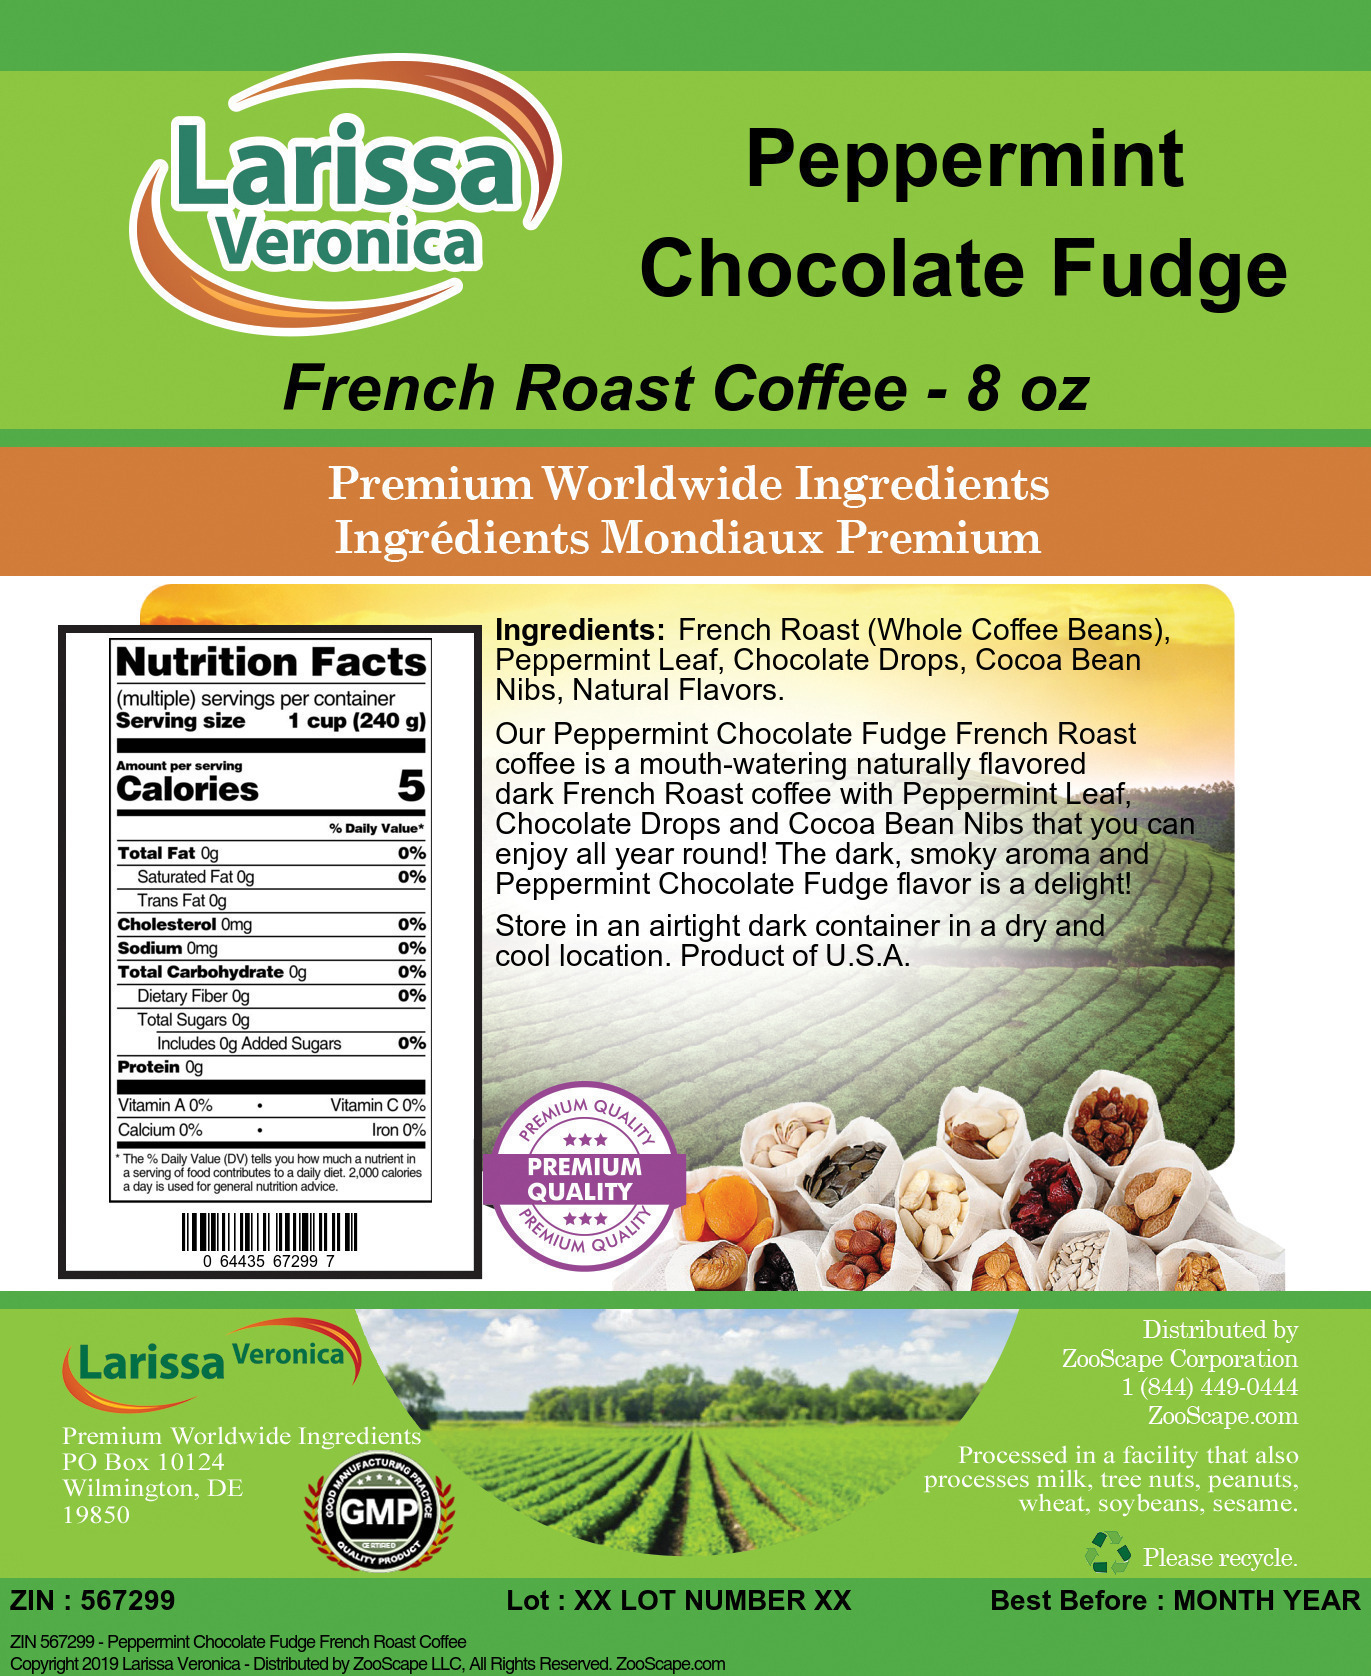 Peppermint Chocolate Fudge French Roast Coffee - Label